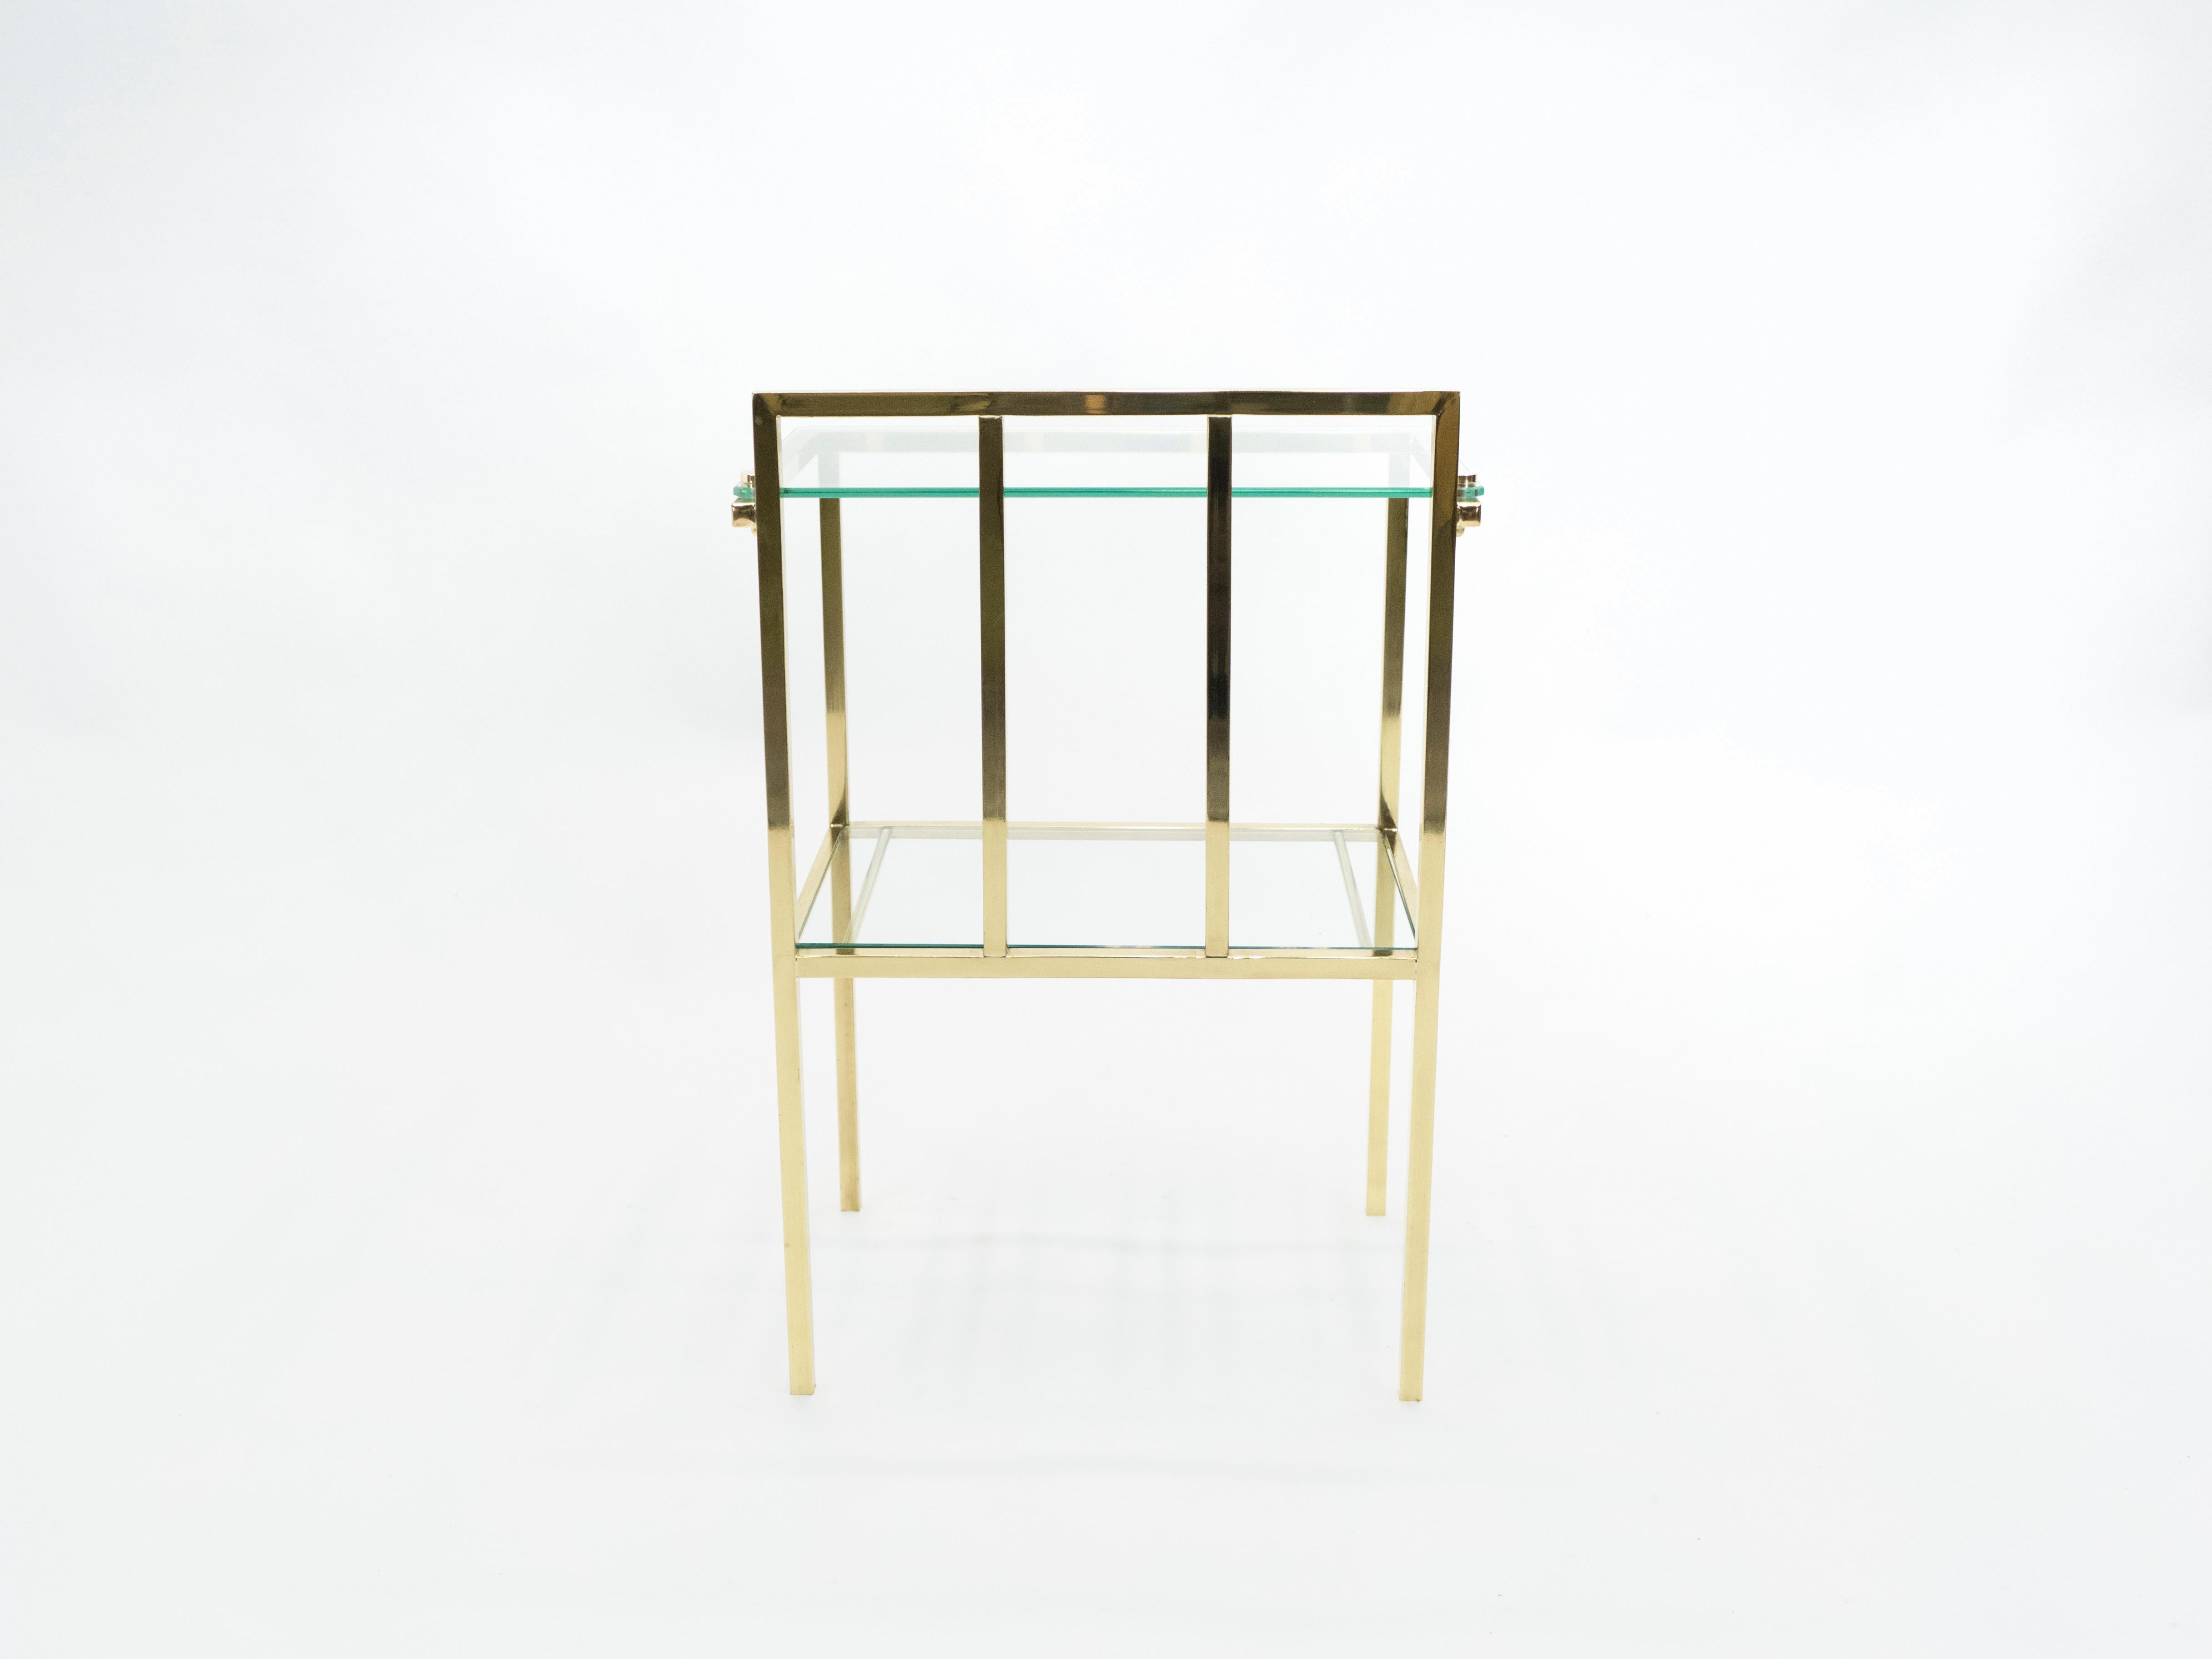 French Brass Two-Tier Glass End Tables Attributed to Marc du Plantier, 1960s For Sale 5